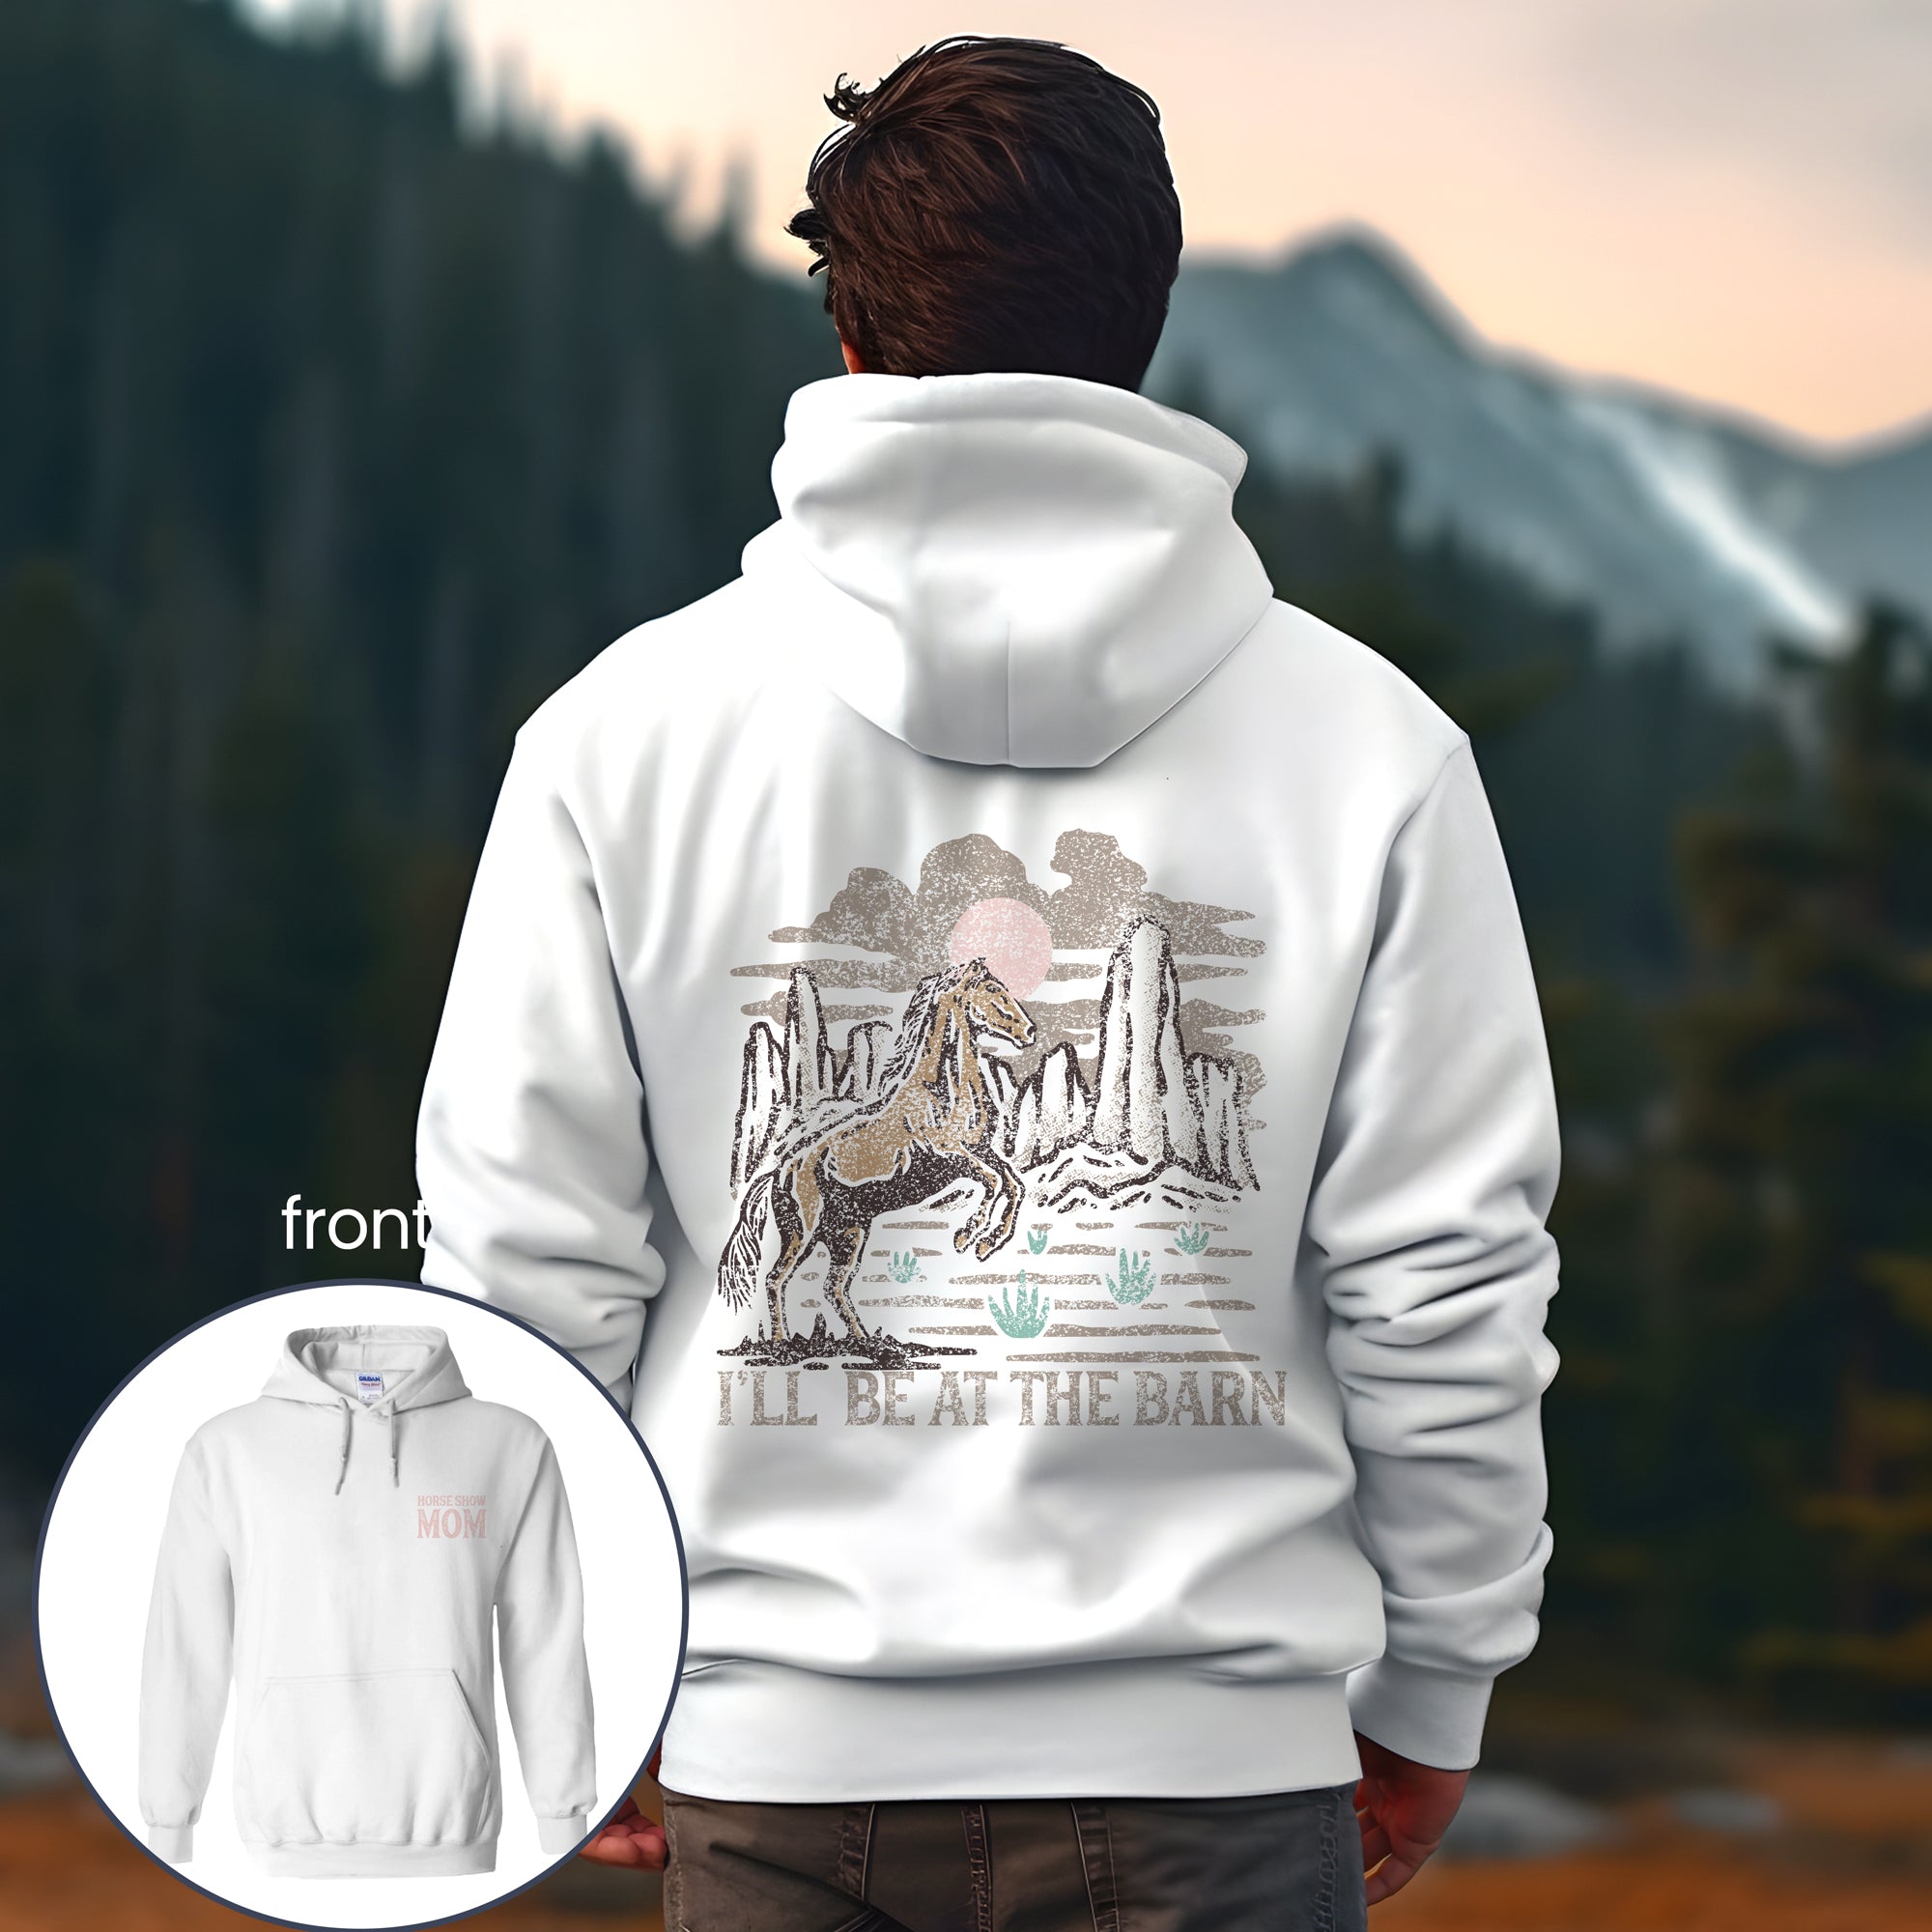 PERSONALIZED I'LL BE AT THE BARN - HOODIE SWEATSHIRT